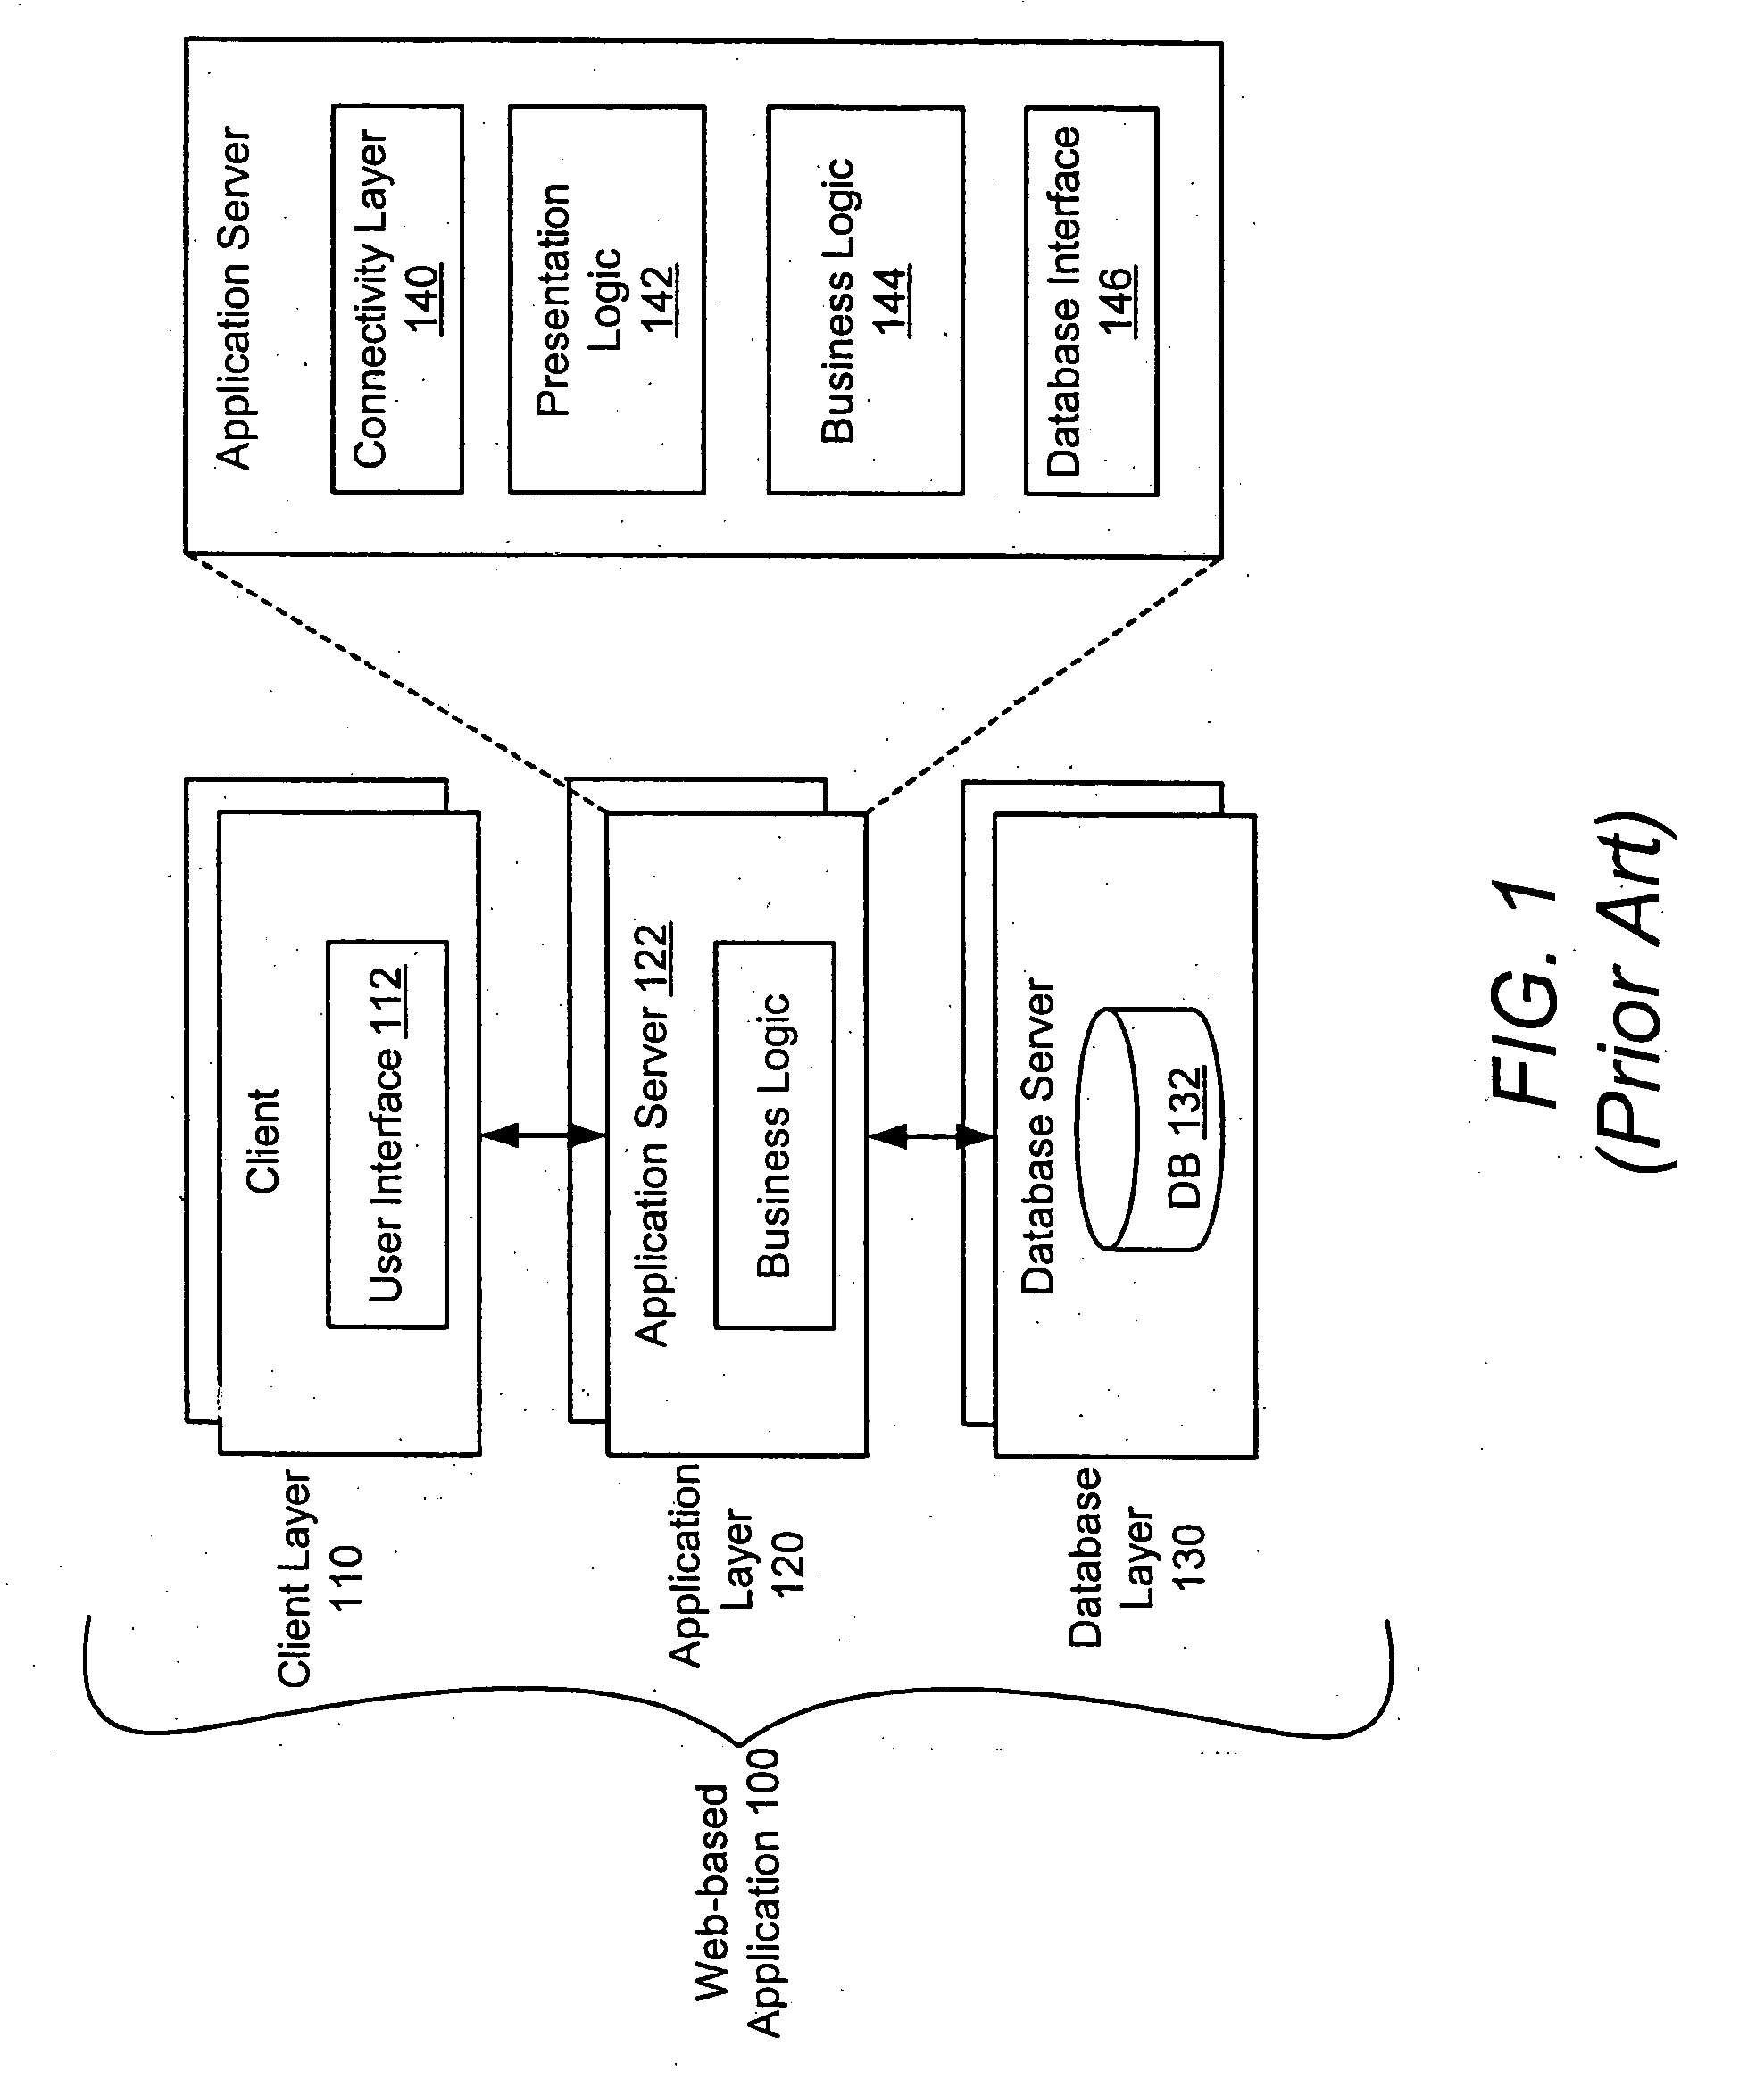 System and method for a query language mapping architecture